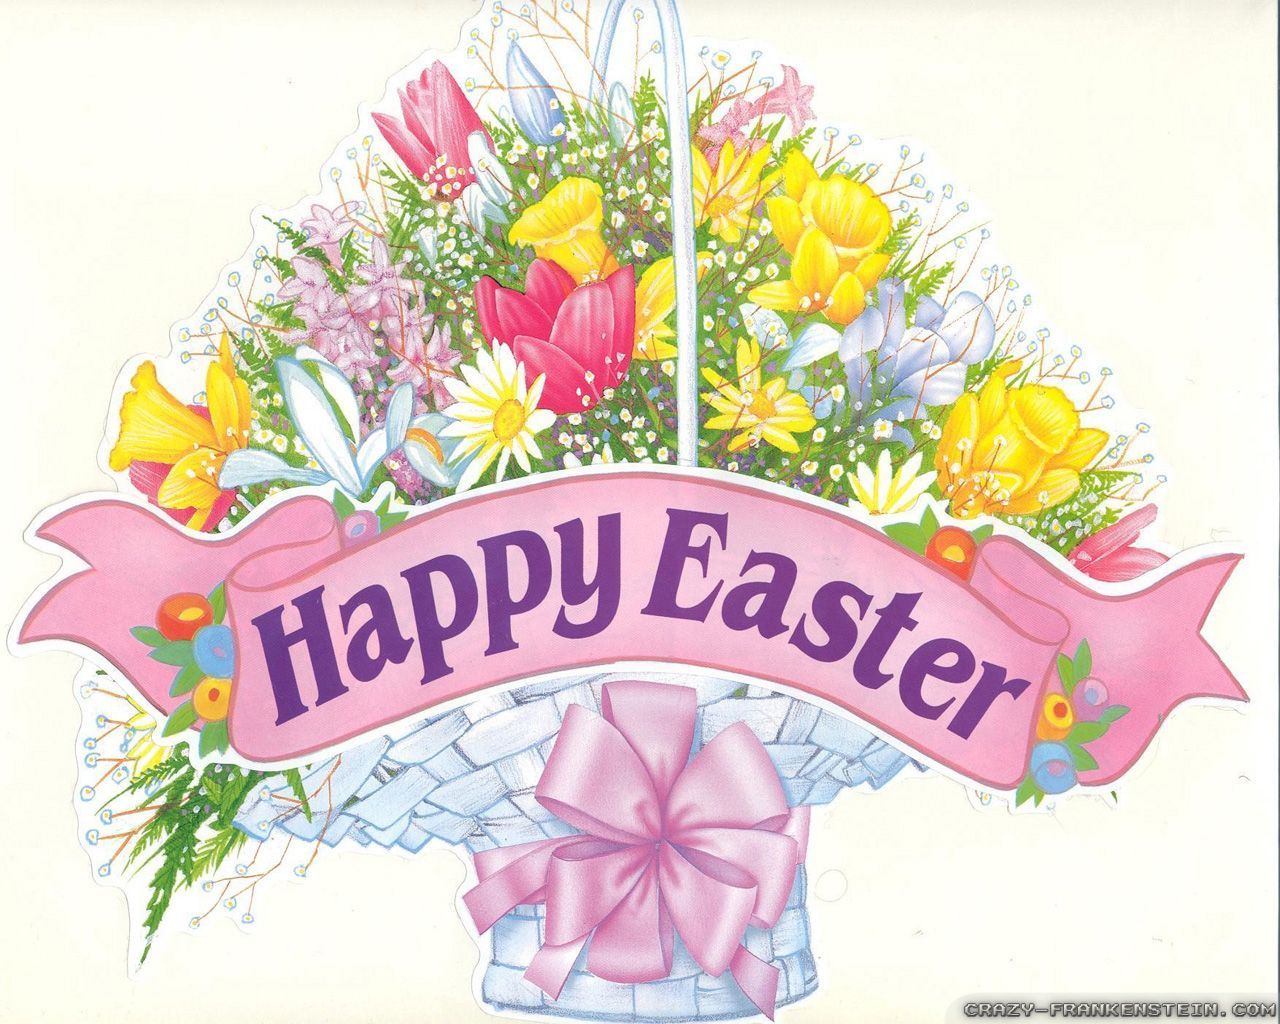 Happy Easter. Happy easter greetings, Easter wishes, Easter sunday image